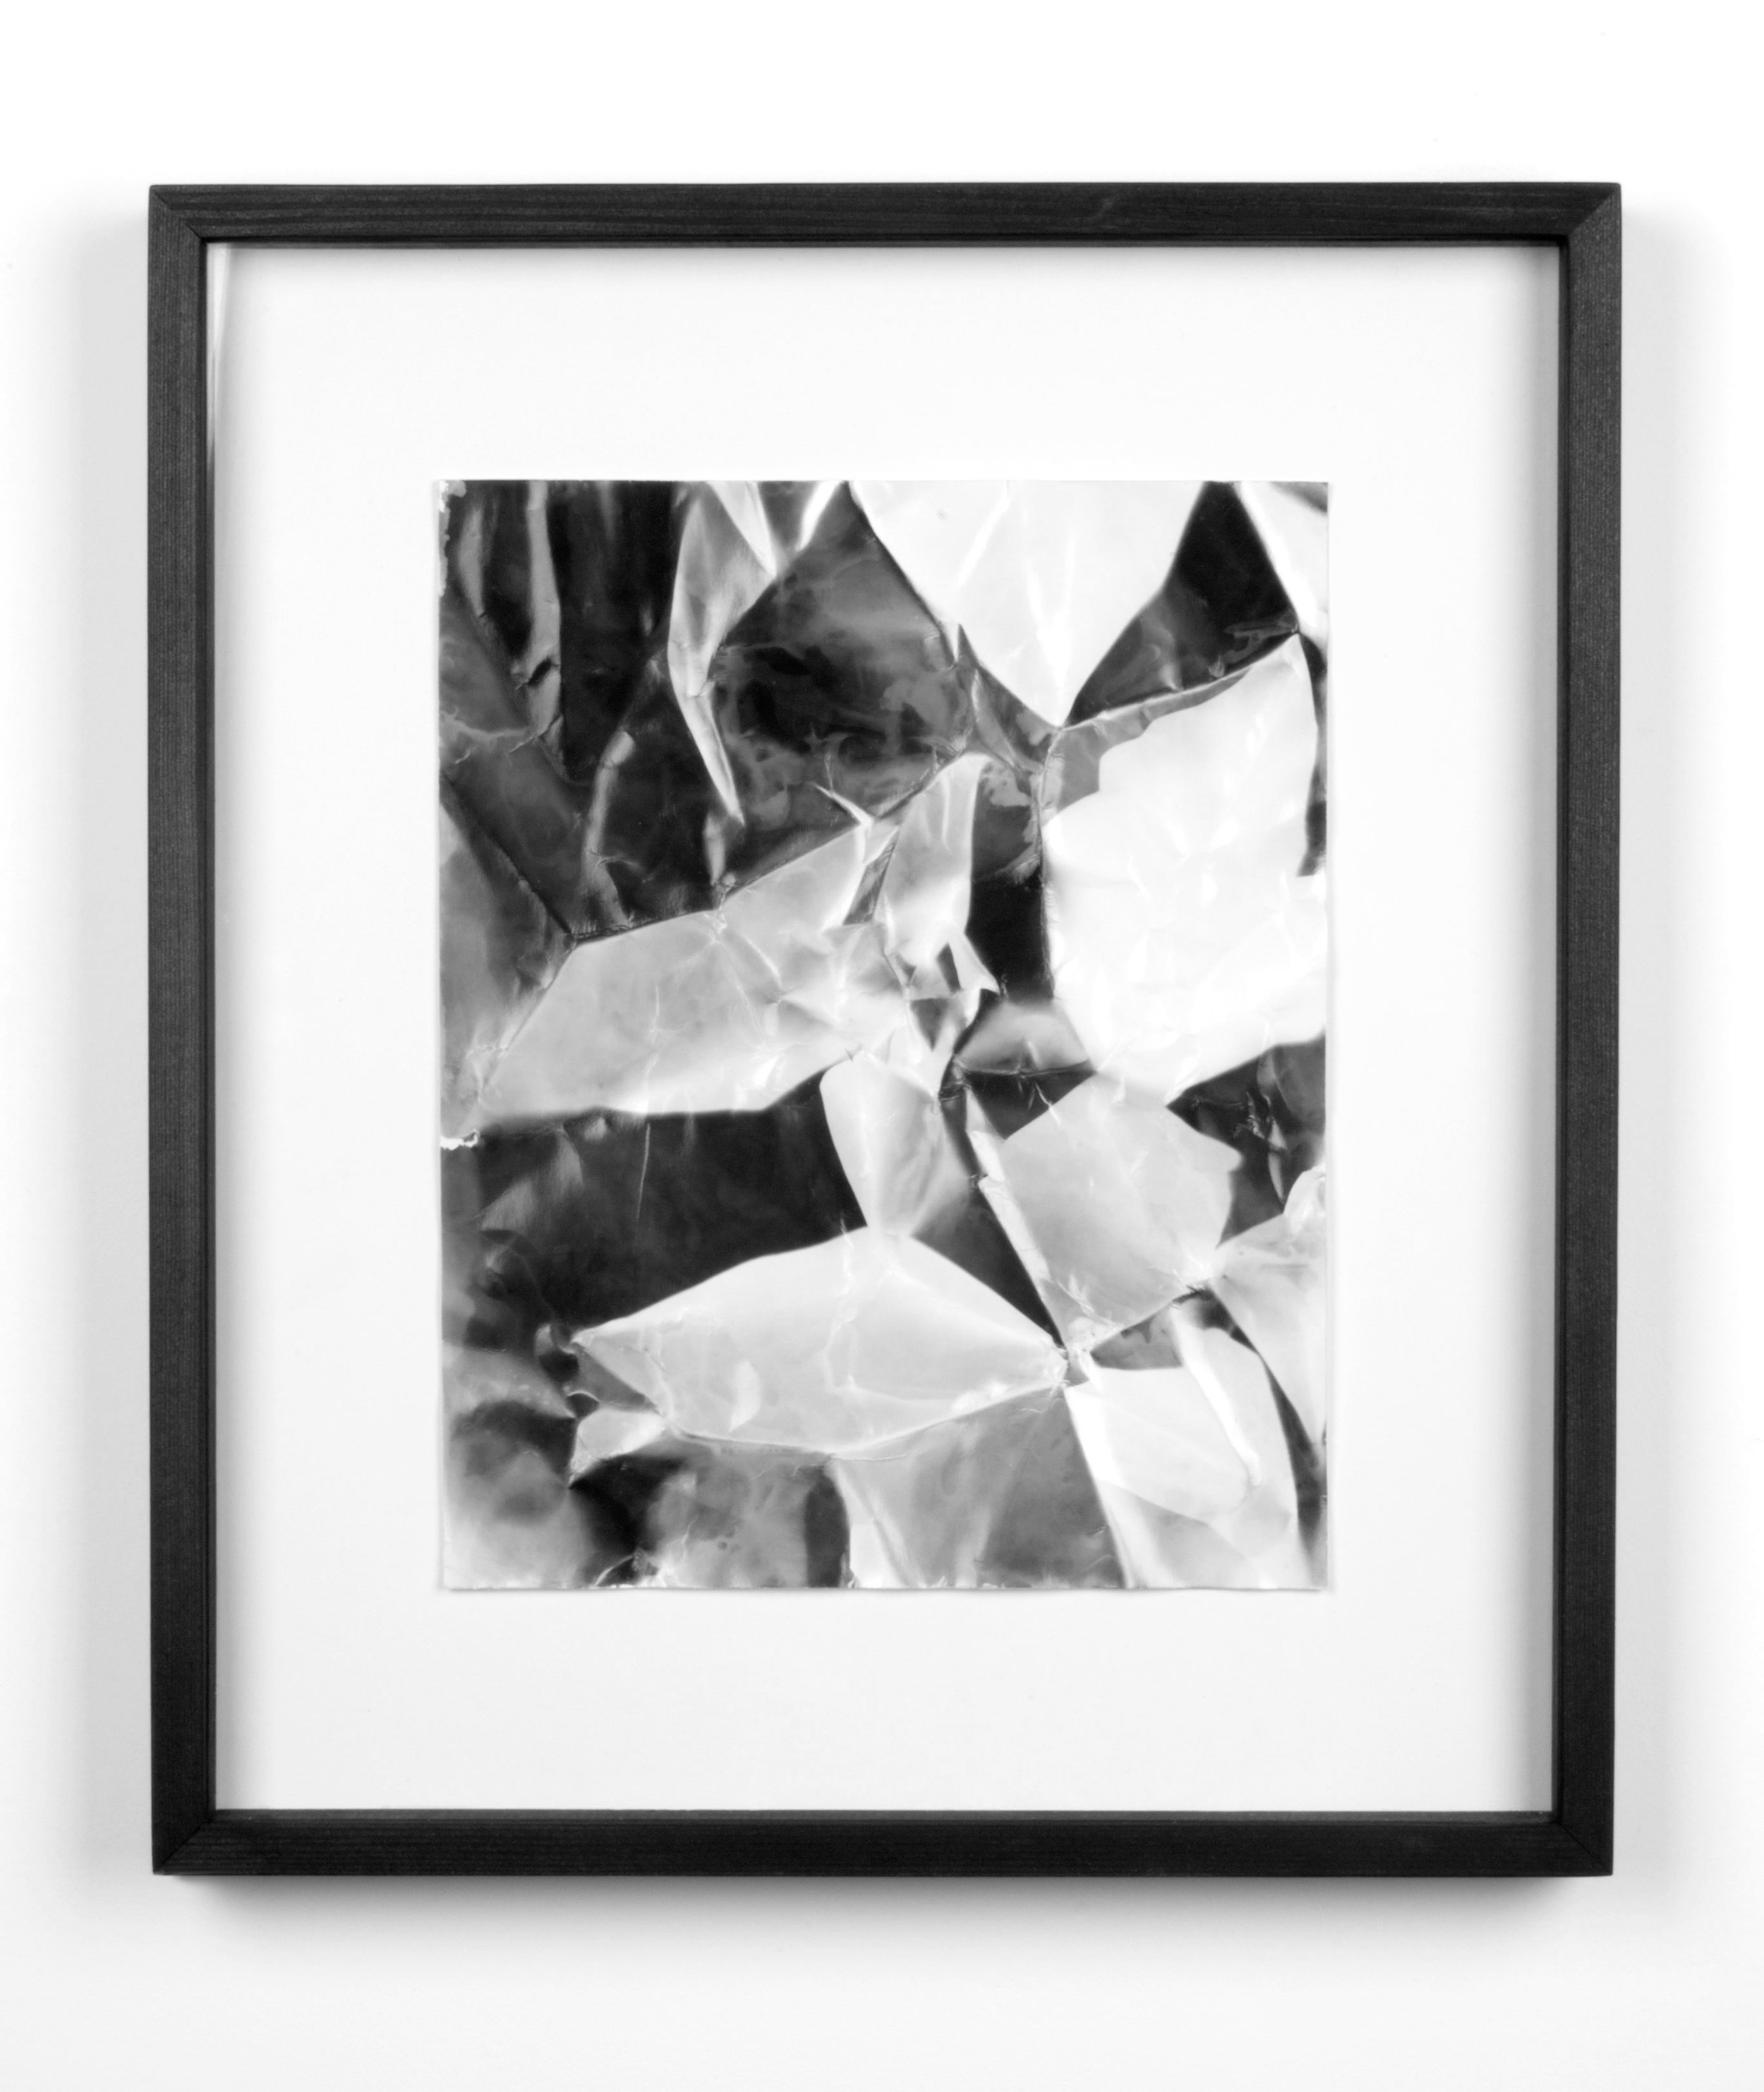   Picture Made by My Hand with the Assistance of Light   2011  Black and white fiber based photographic paper  14 7/8 x 12 7/8 inches   Pictures Made by My Hand with the Assistance of Light, 2005–2014    A Diagram of Forces, 2011     